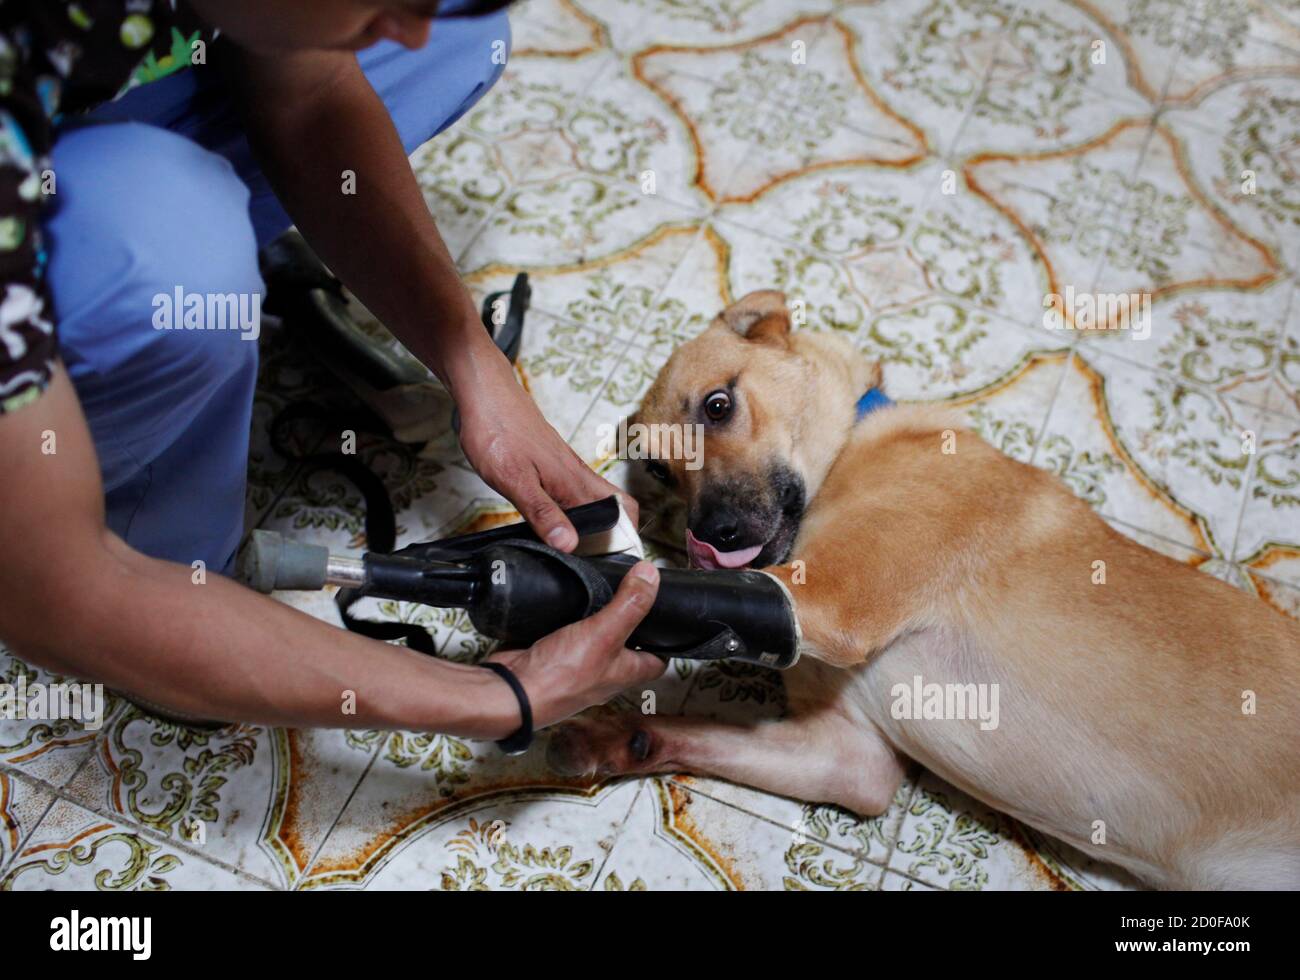 A veterinarian removes Pay de Limon's (Lemon Pay) front prosthetic leg at the Milagros Caninos rescue shelter in Mexico City August 29, 2012. Members of a drug gang in the Mexican state of Zacatecas chopped off Limon's paws to practise cutting fingers off kidnapped people, according to Milagros Caninos founder Patricia Ruiz. Fresnillo residents found Limon in a dumpster bleeding and legless. After administering first aid procedures, they managed to take him to Milagros Caninos, an association that rehabilitates dogs that have suffered extreme abuse. The prosthetic limbs were made at OrthoPets  Stock Photo